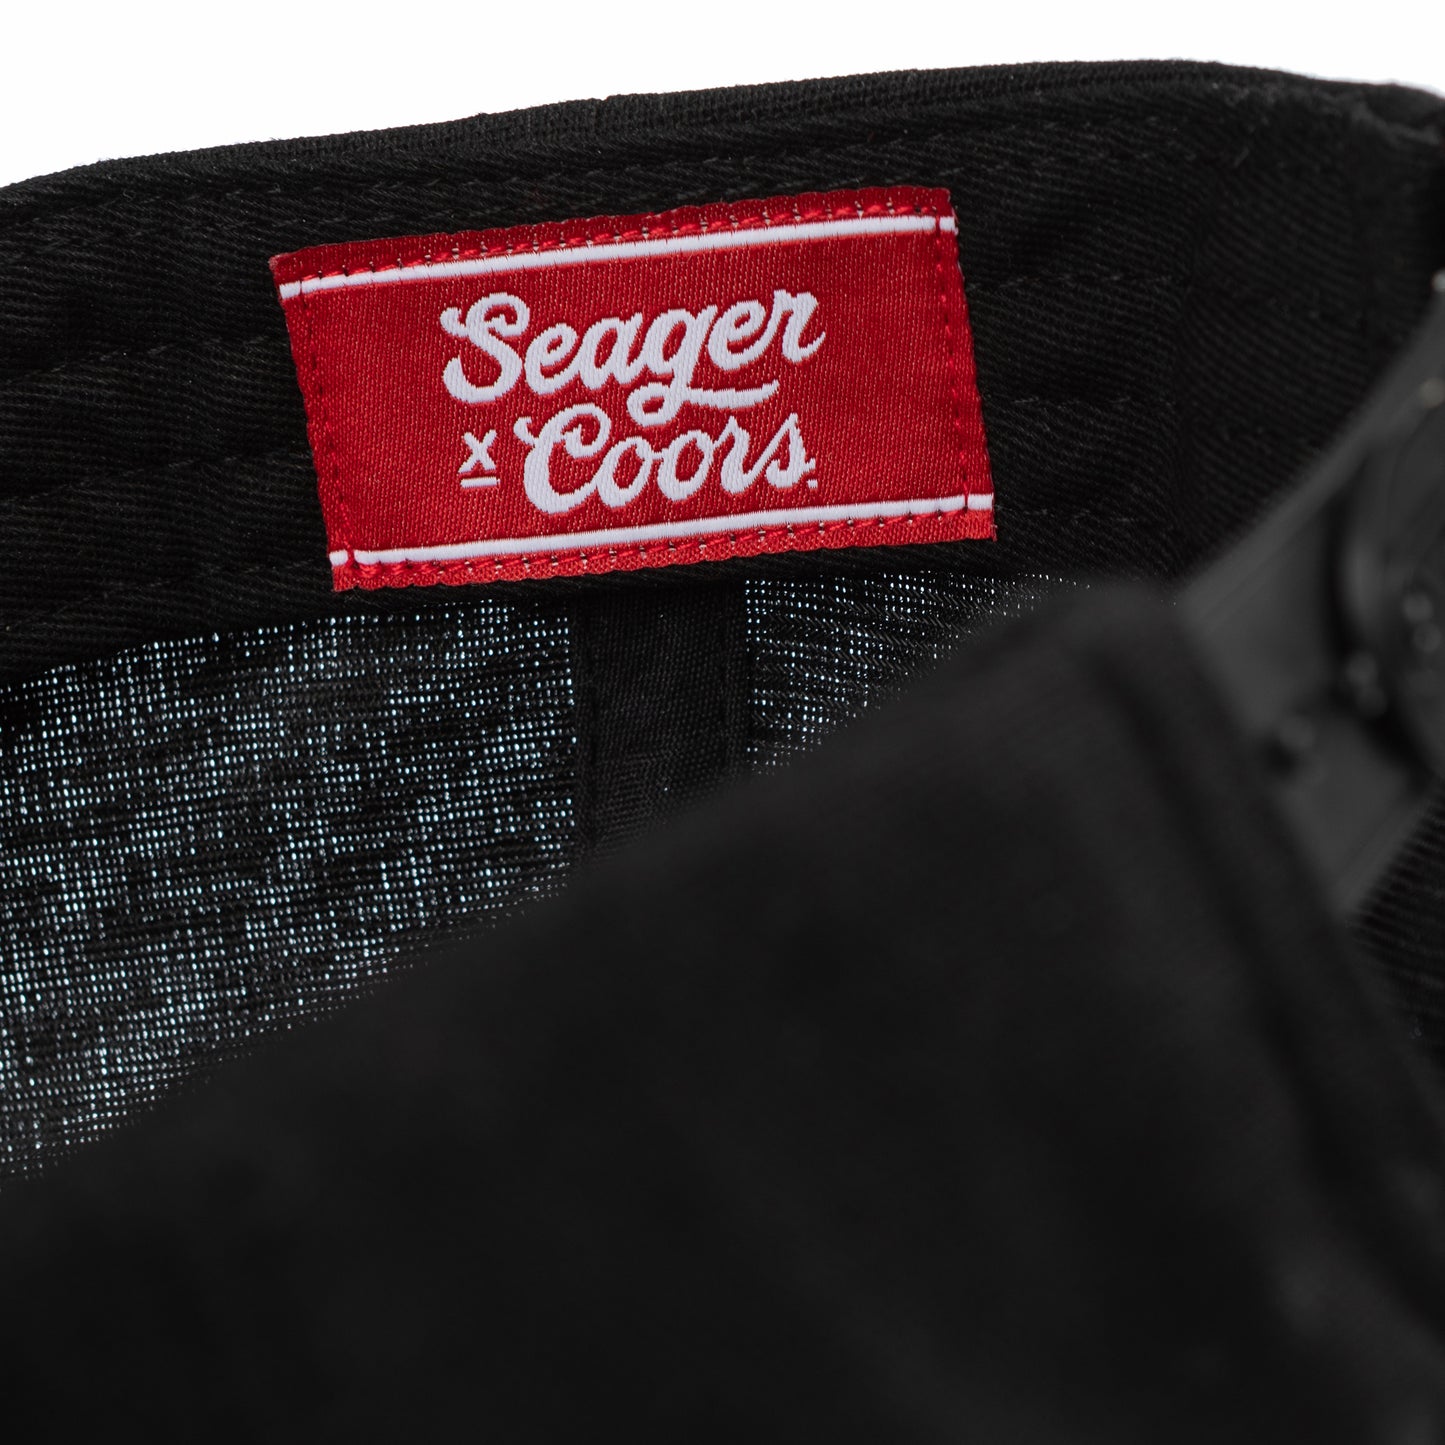 Coors x Seager Snapback